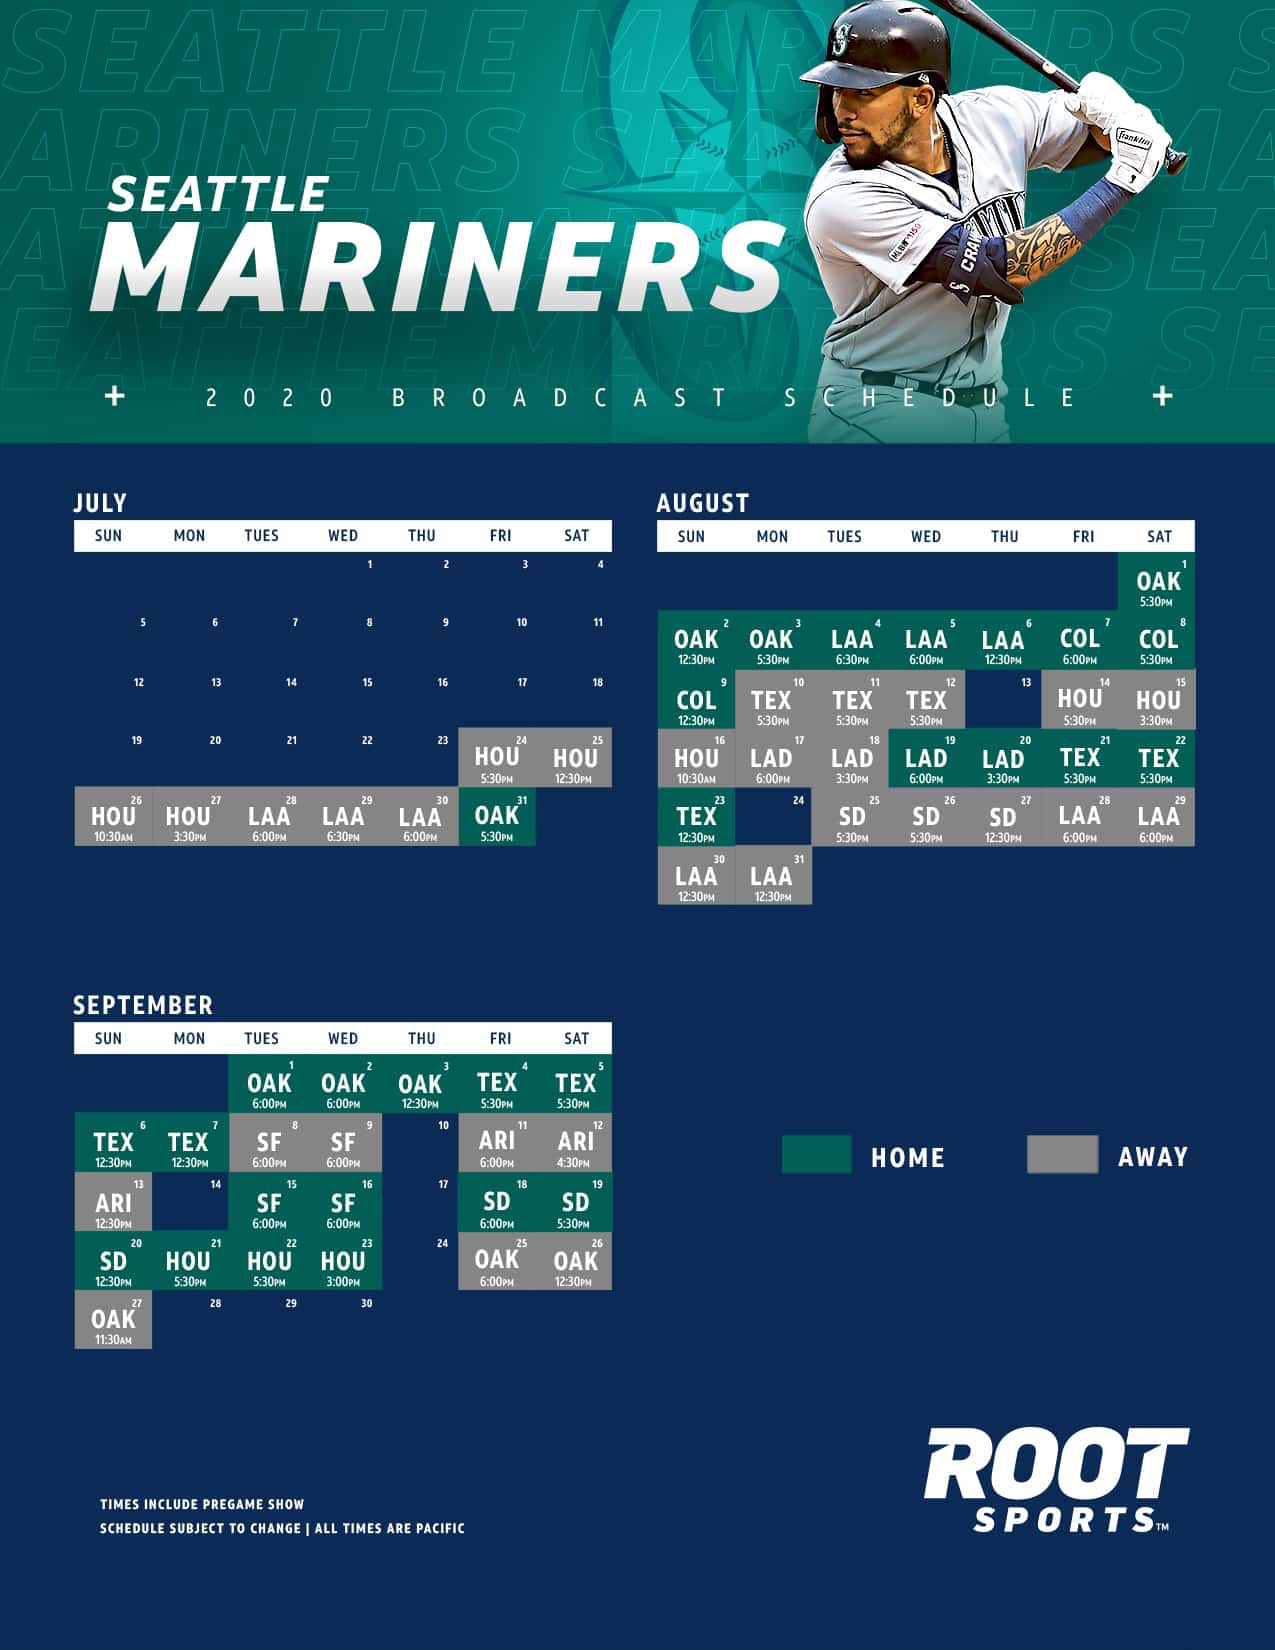 Seattle Mariners ROOT SPORTS